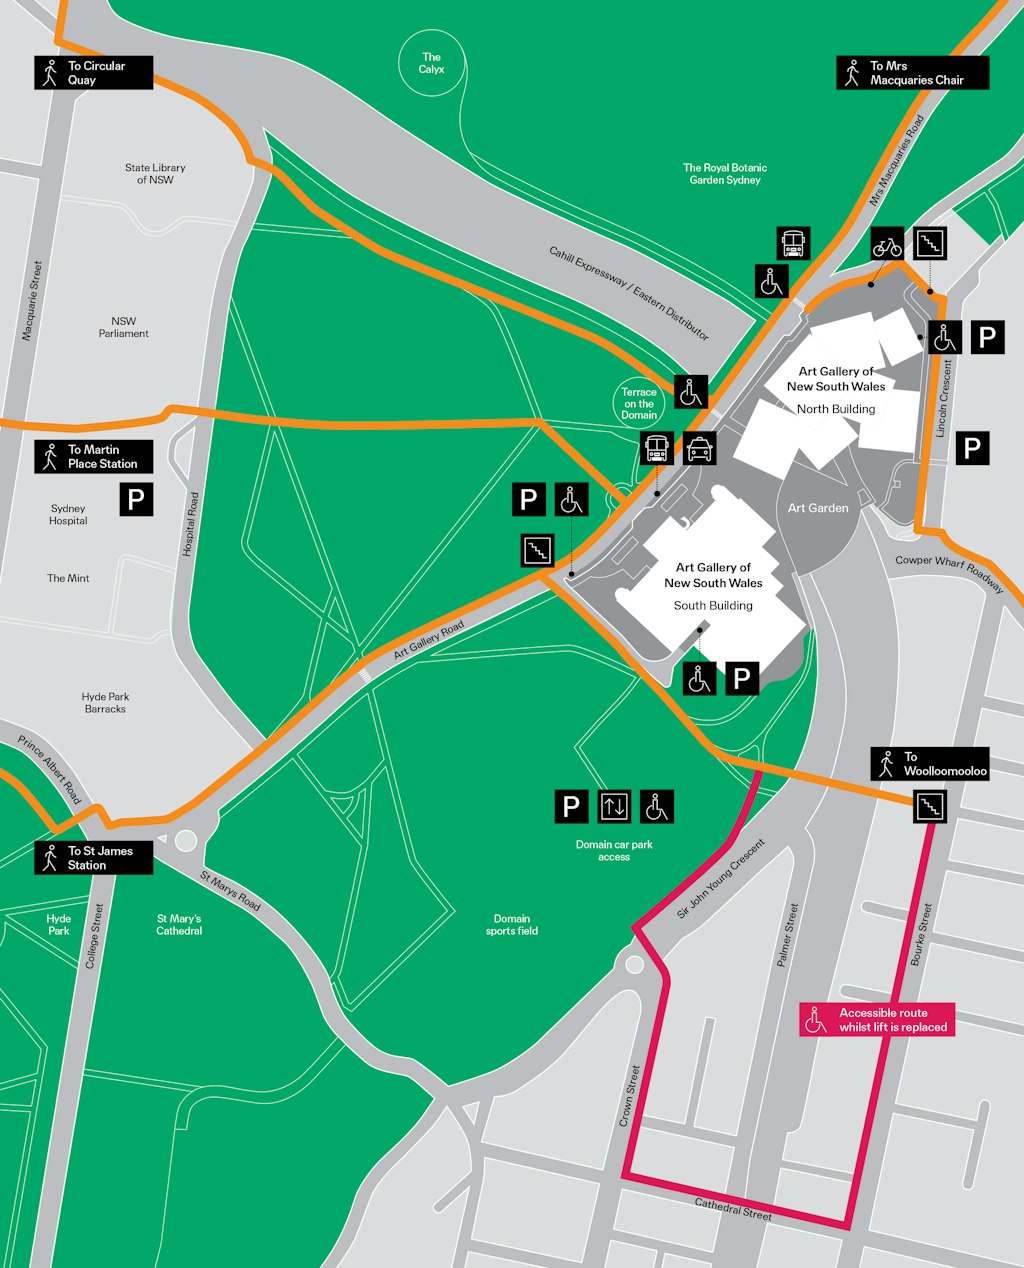 Map of the area around the Art Gallery showing various roads, pedestrian routes and accessible routes